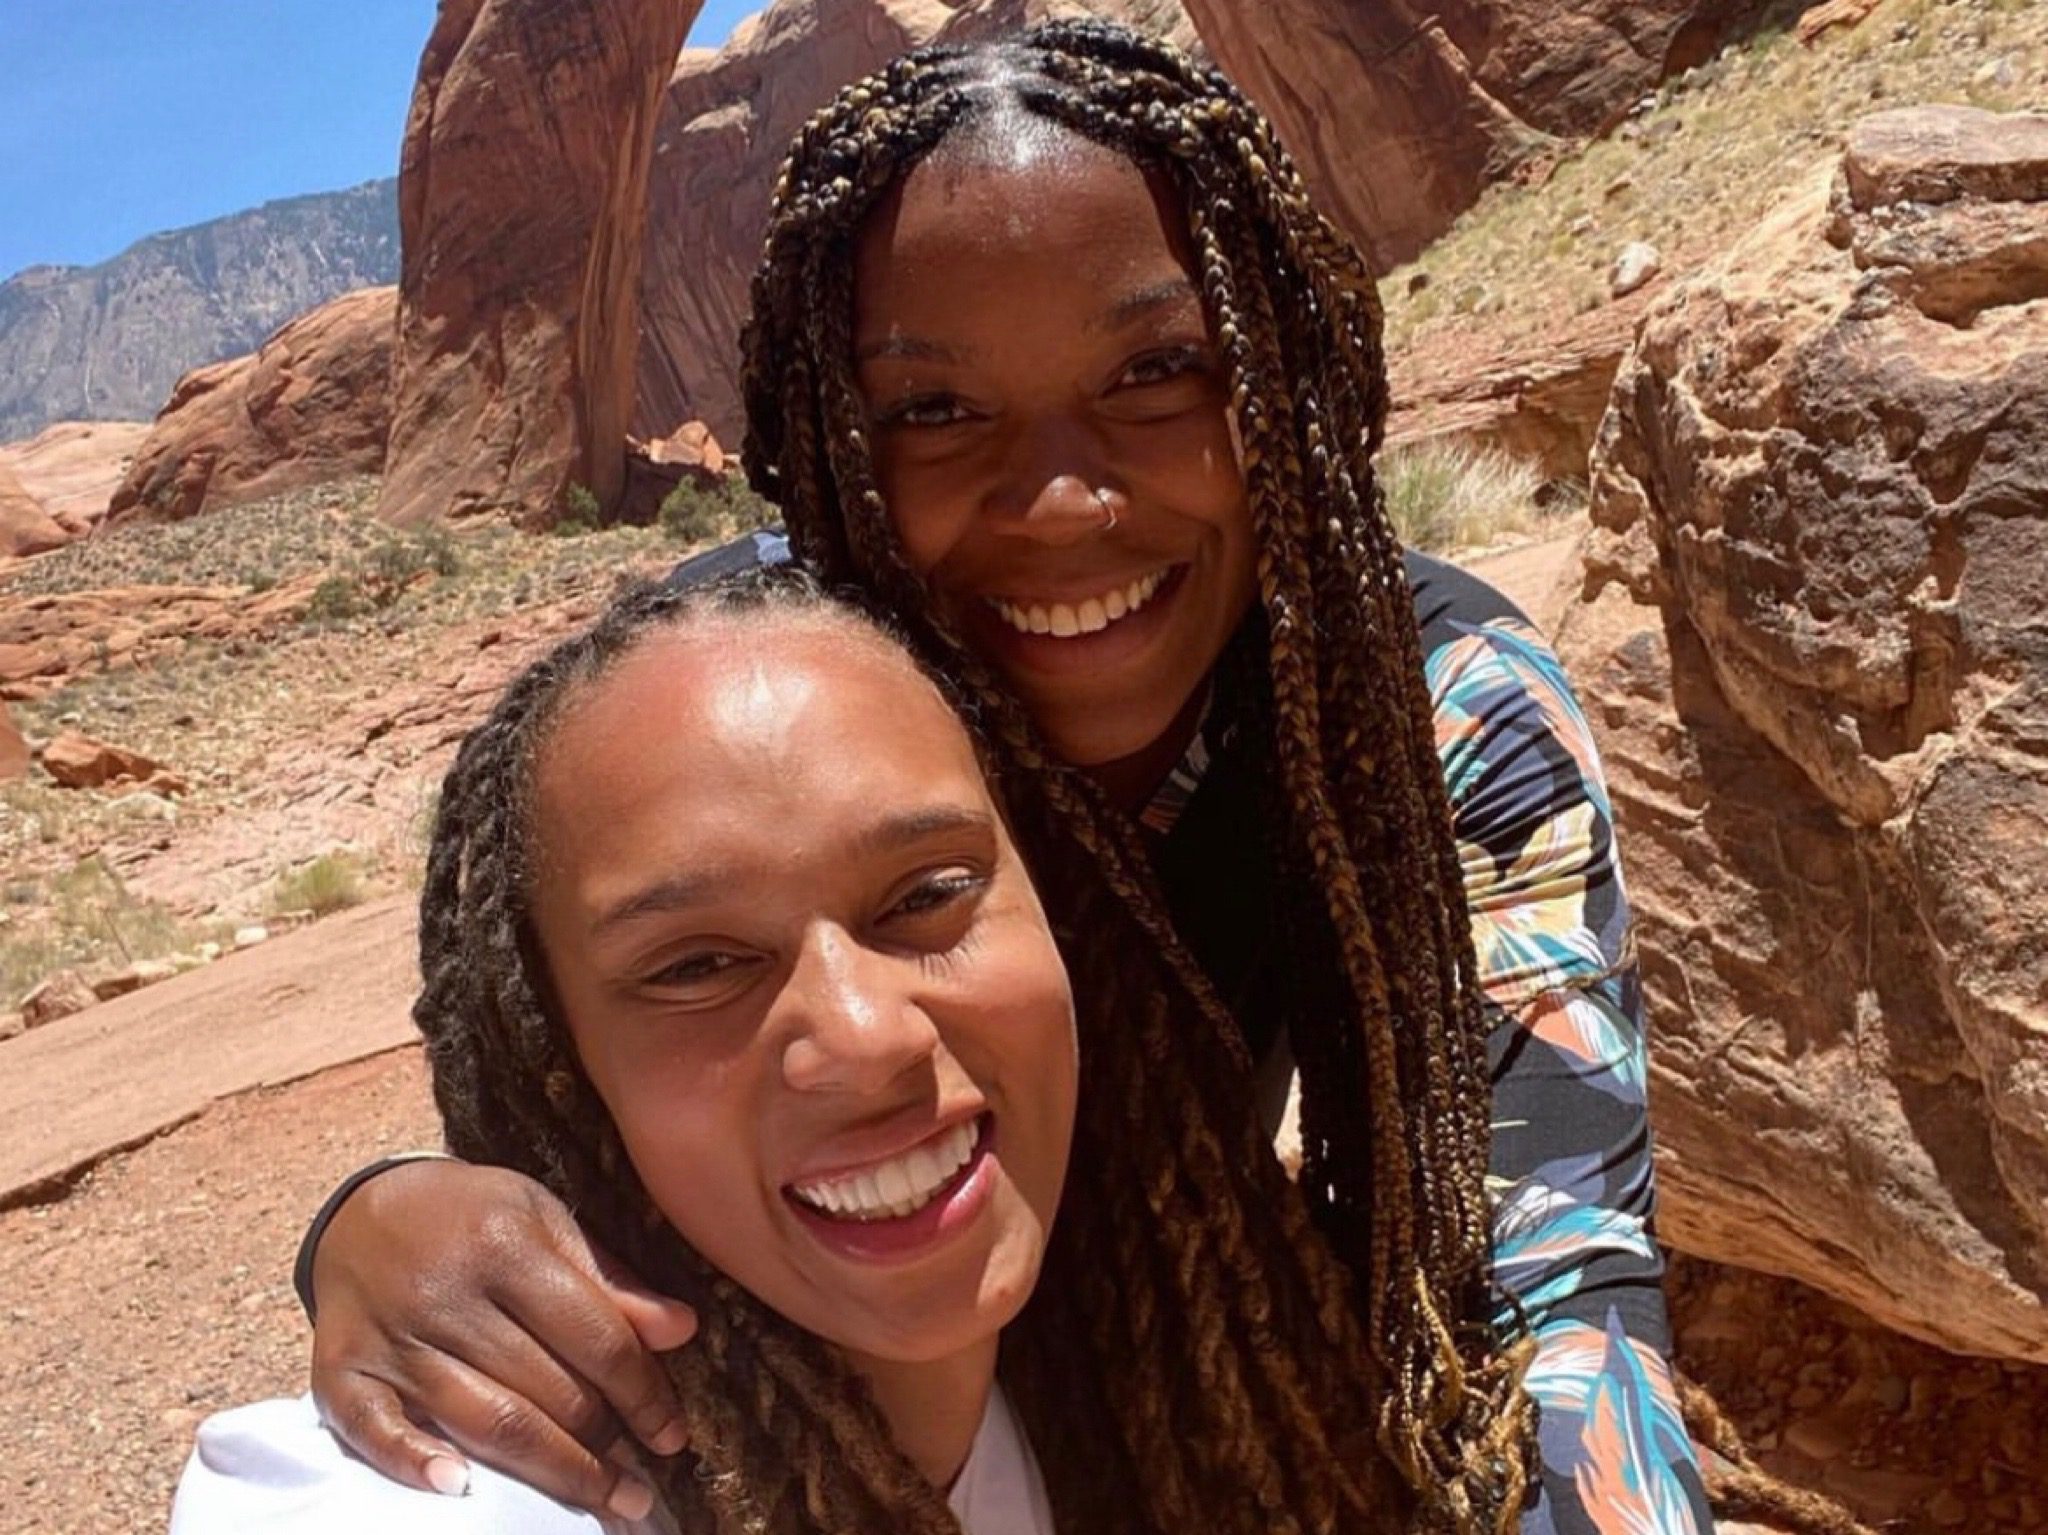 Brittney Griner testifies in court; sends supportive message to her wife